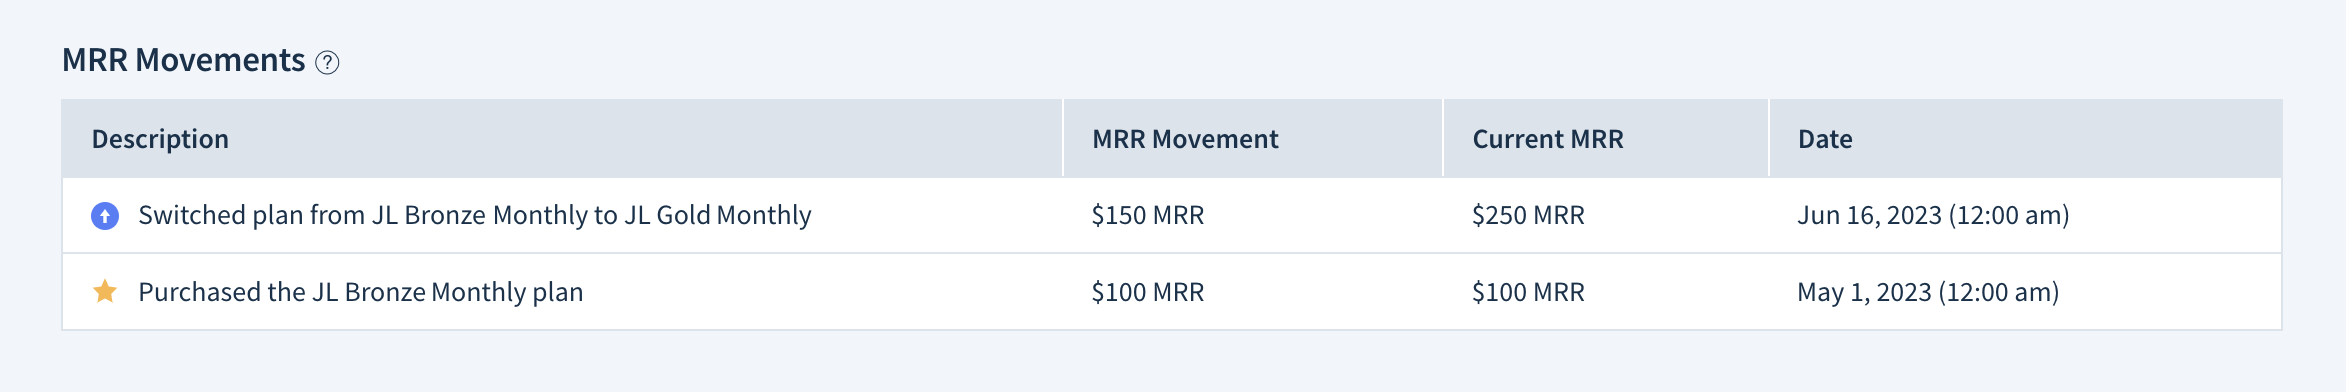 Screenshot of the MRR Movements table. It shows a new business movement of 100 dollars is described as “Purchased the JL Bronze Monthly plan” on May 1st, 2023. Current MRR after this movement is 100 dollars. On June 16th, there’s an expansion of 150 dollars described as “Switched plan from JL Bronze Monthly to JL Gold Monthly”. Current MRR after this movement is 250 dollars.